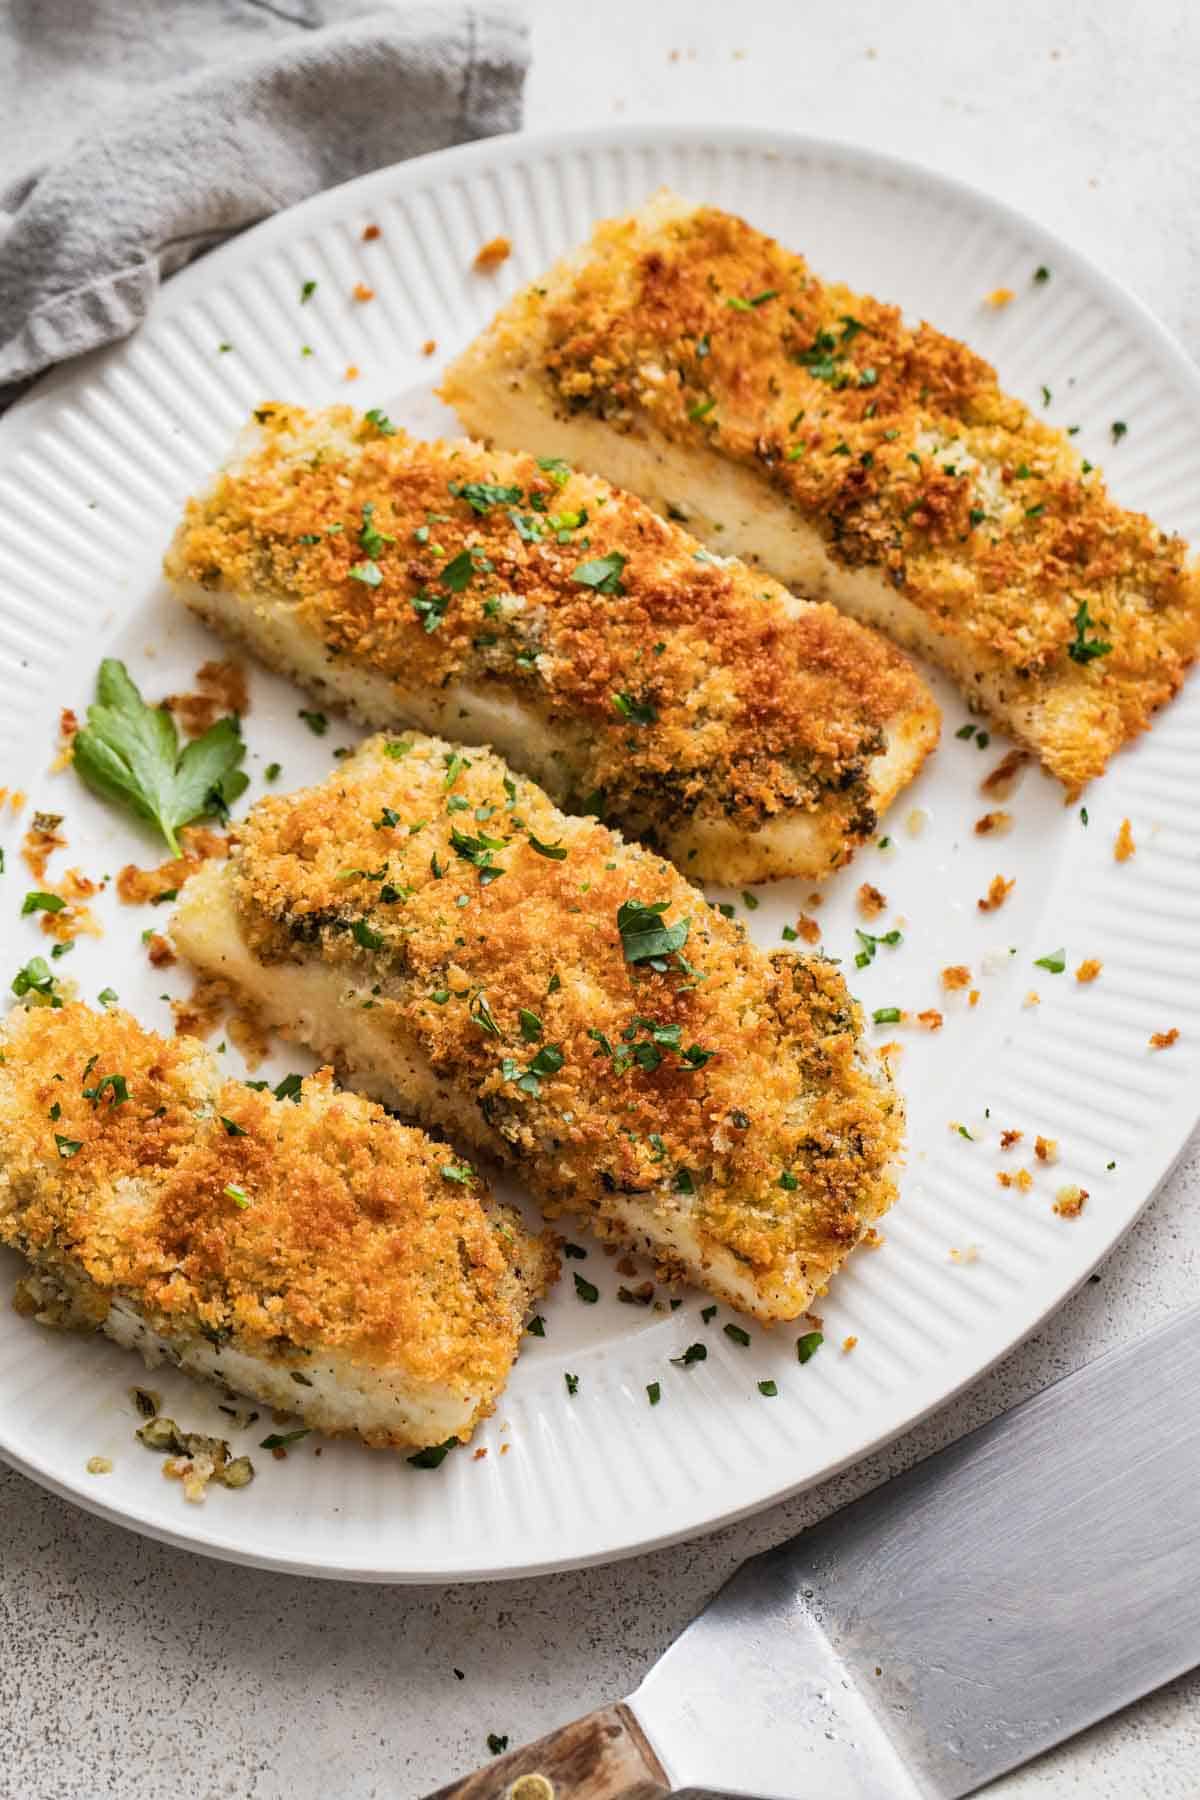 Four panko crusted halibut fillets on a white plate with parsley.